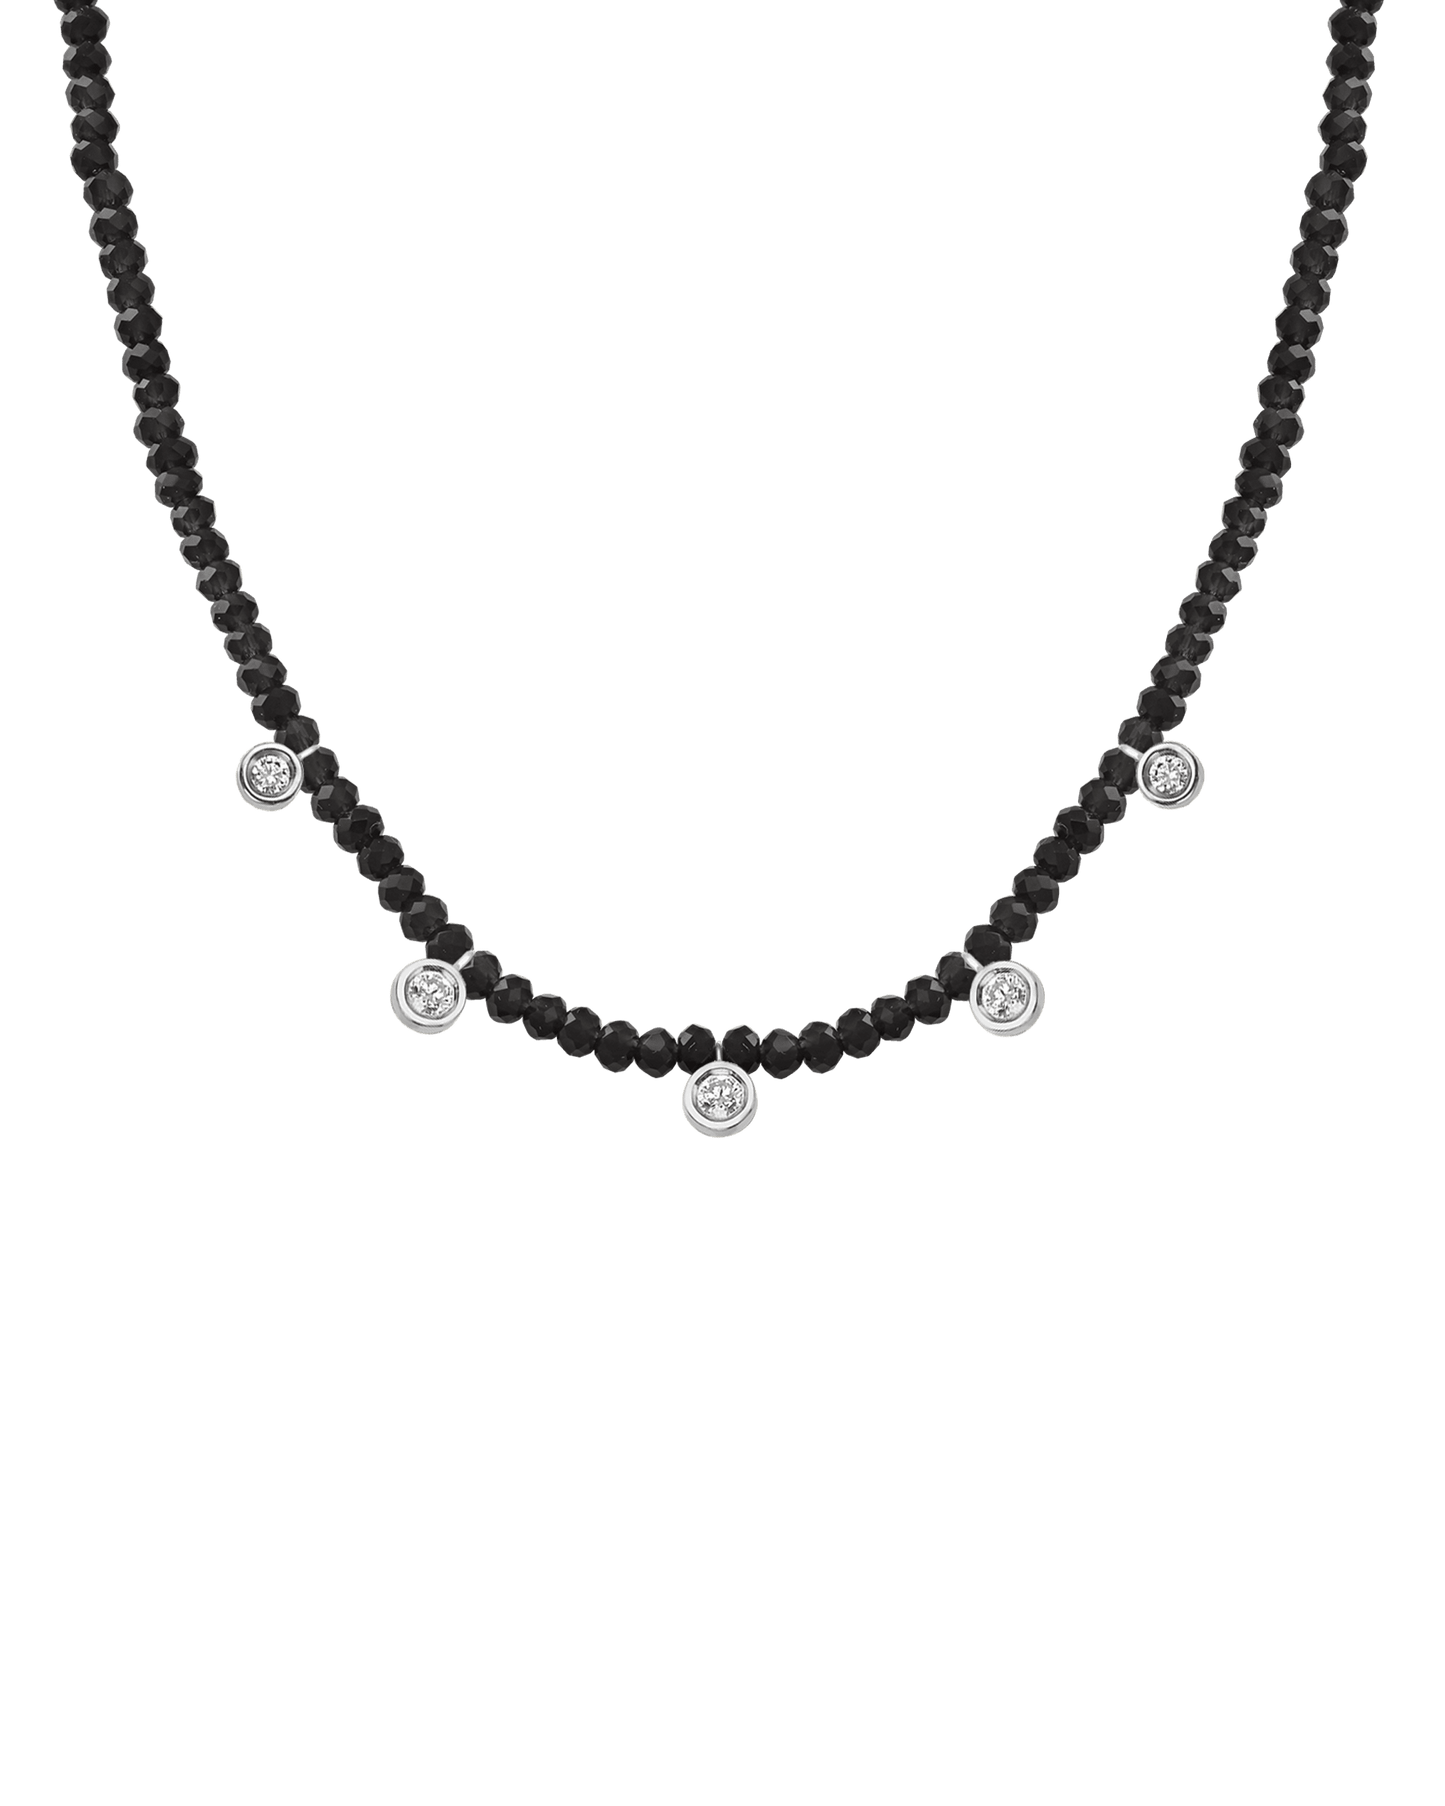 Emerald Gemstone & Five diamonds Necklace - 14K White Gold Necklaces magal-dev Glass Beads Black Spinnel 14" - Collar 